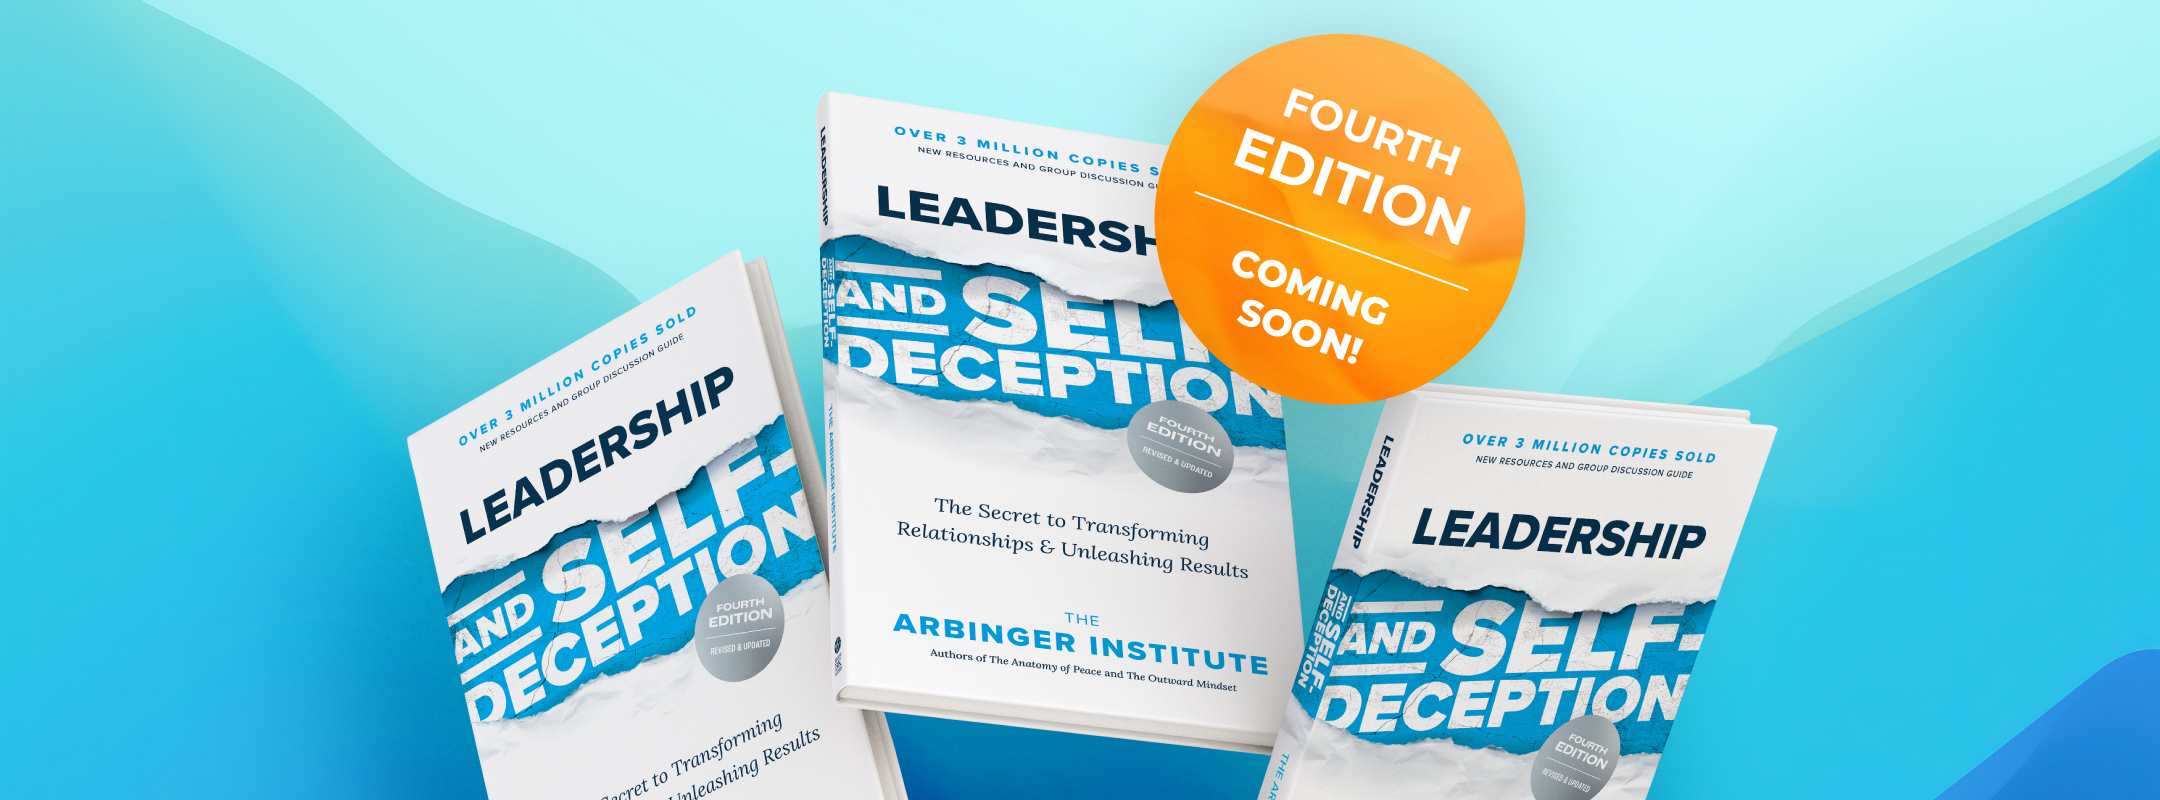 Introducing the new fourth edition of Leadership and Self-Deception